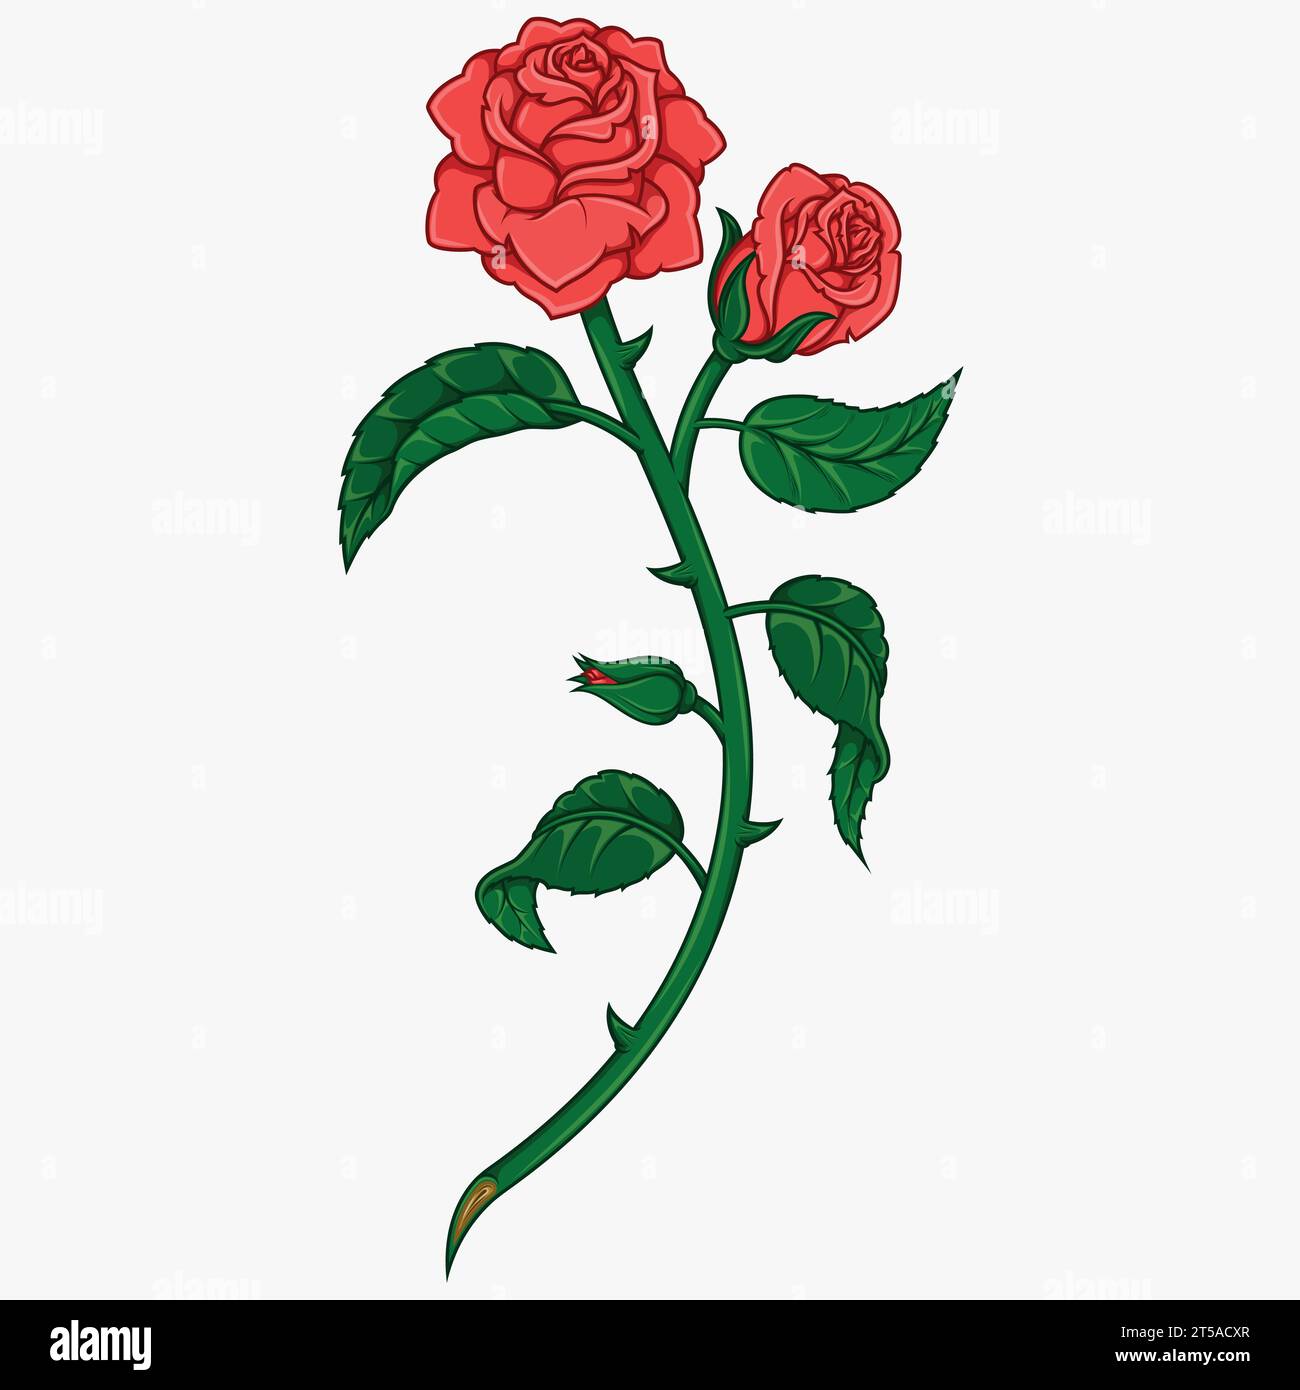 Vector design of a bouquet of roses, with leaves, petals and thorns, gift for lovers, plant for decoration Stock Vector